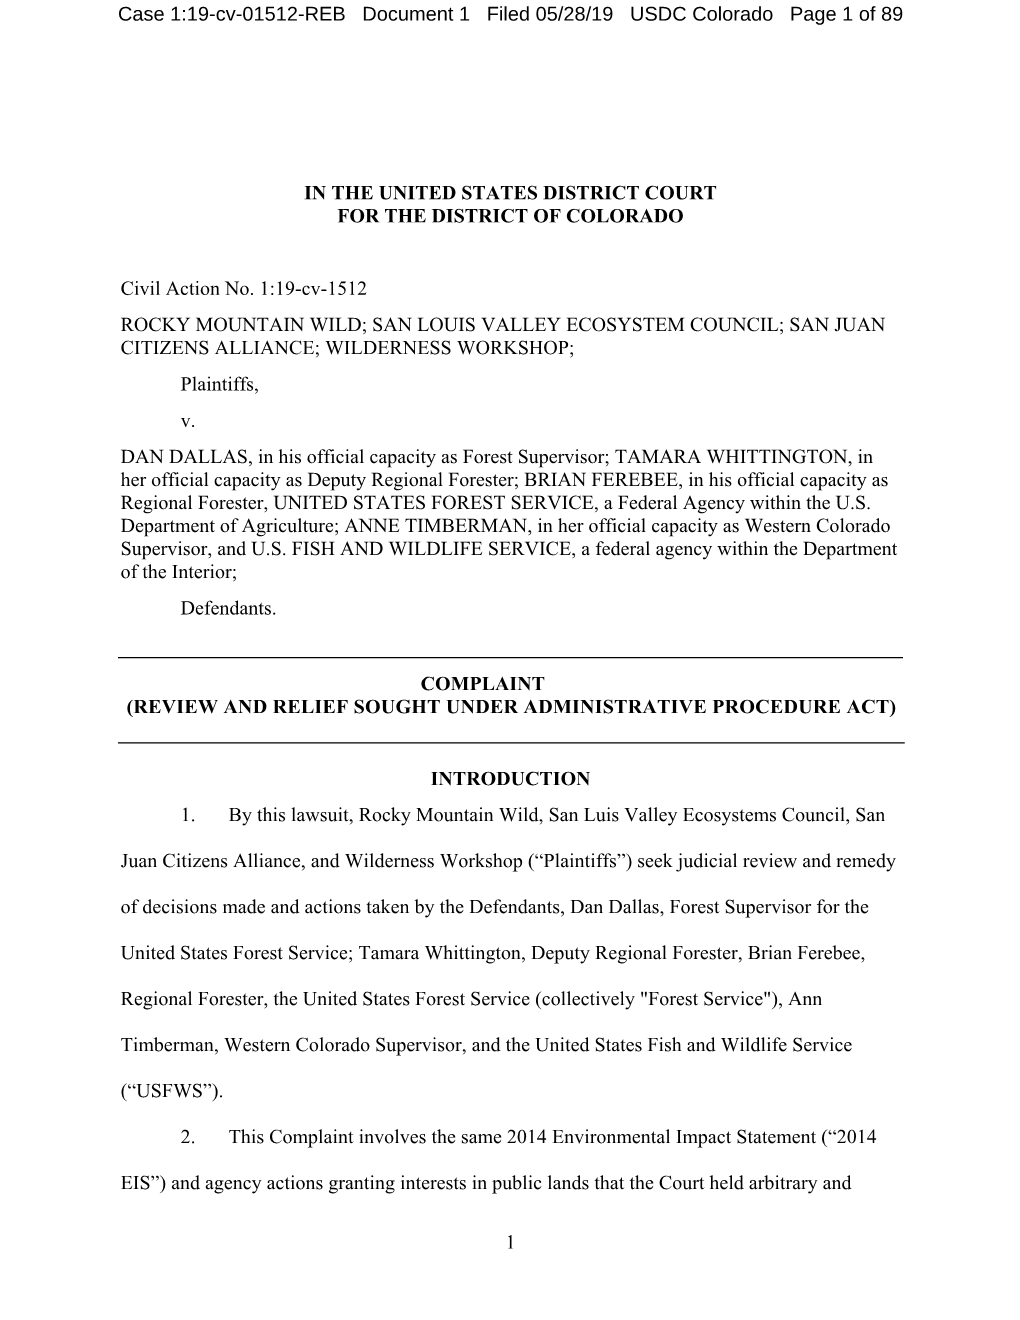 Case 1:19-Cv-01512-REB Document 1 Filed 05/28/19 USDC Colorado Page 1 of 89